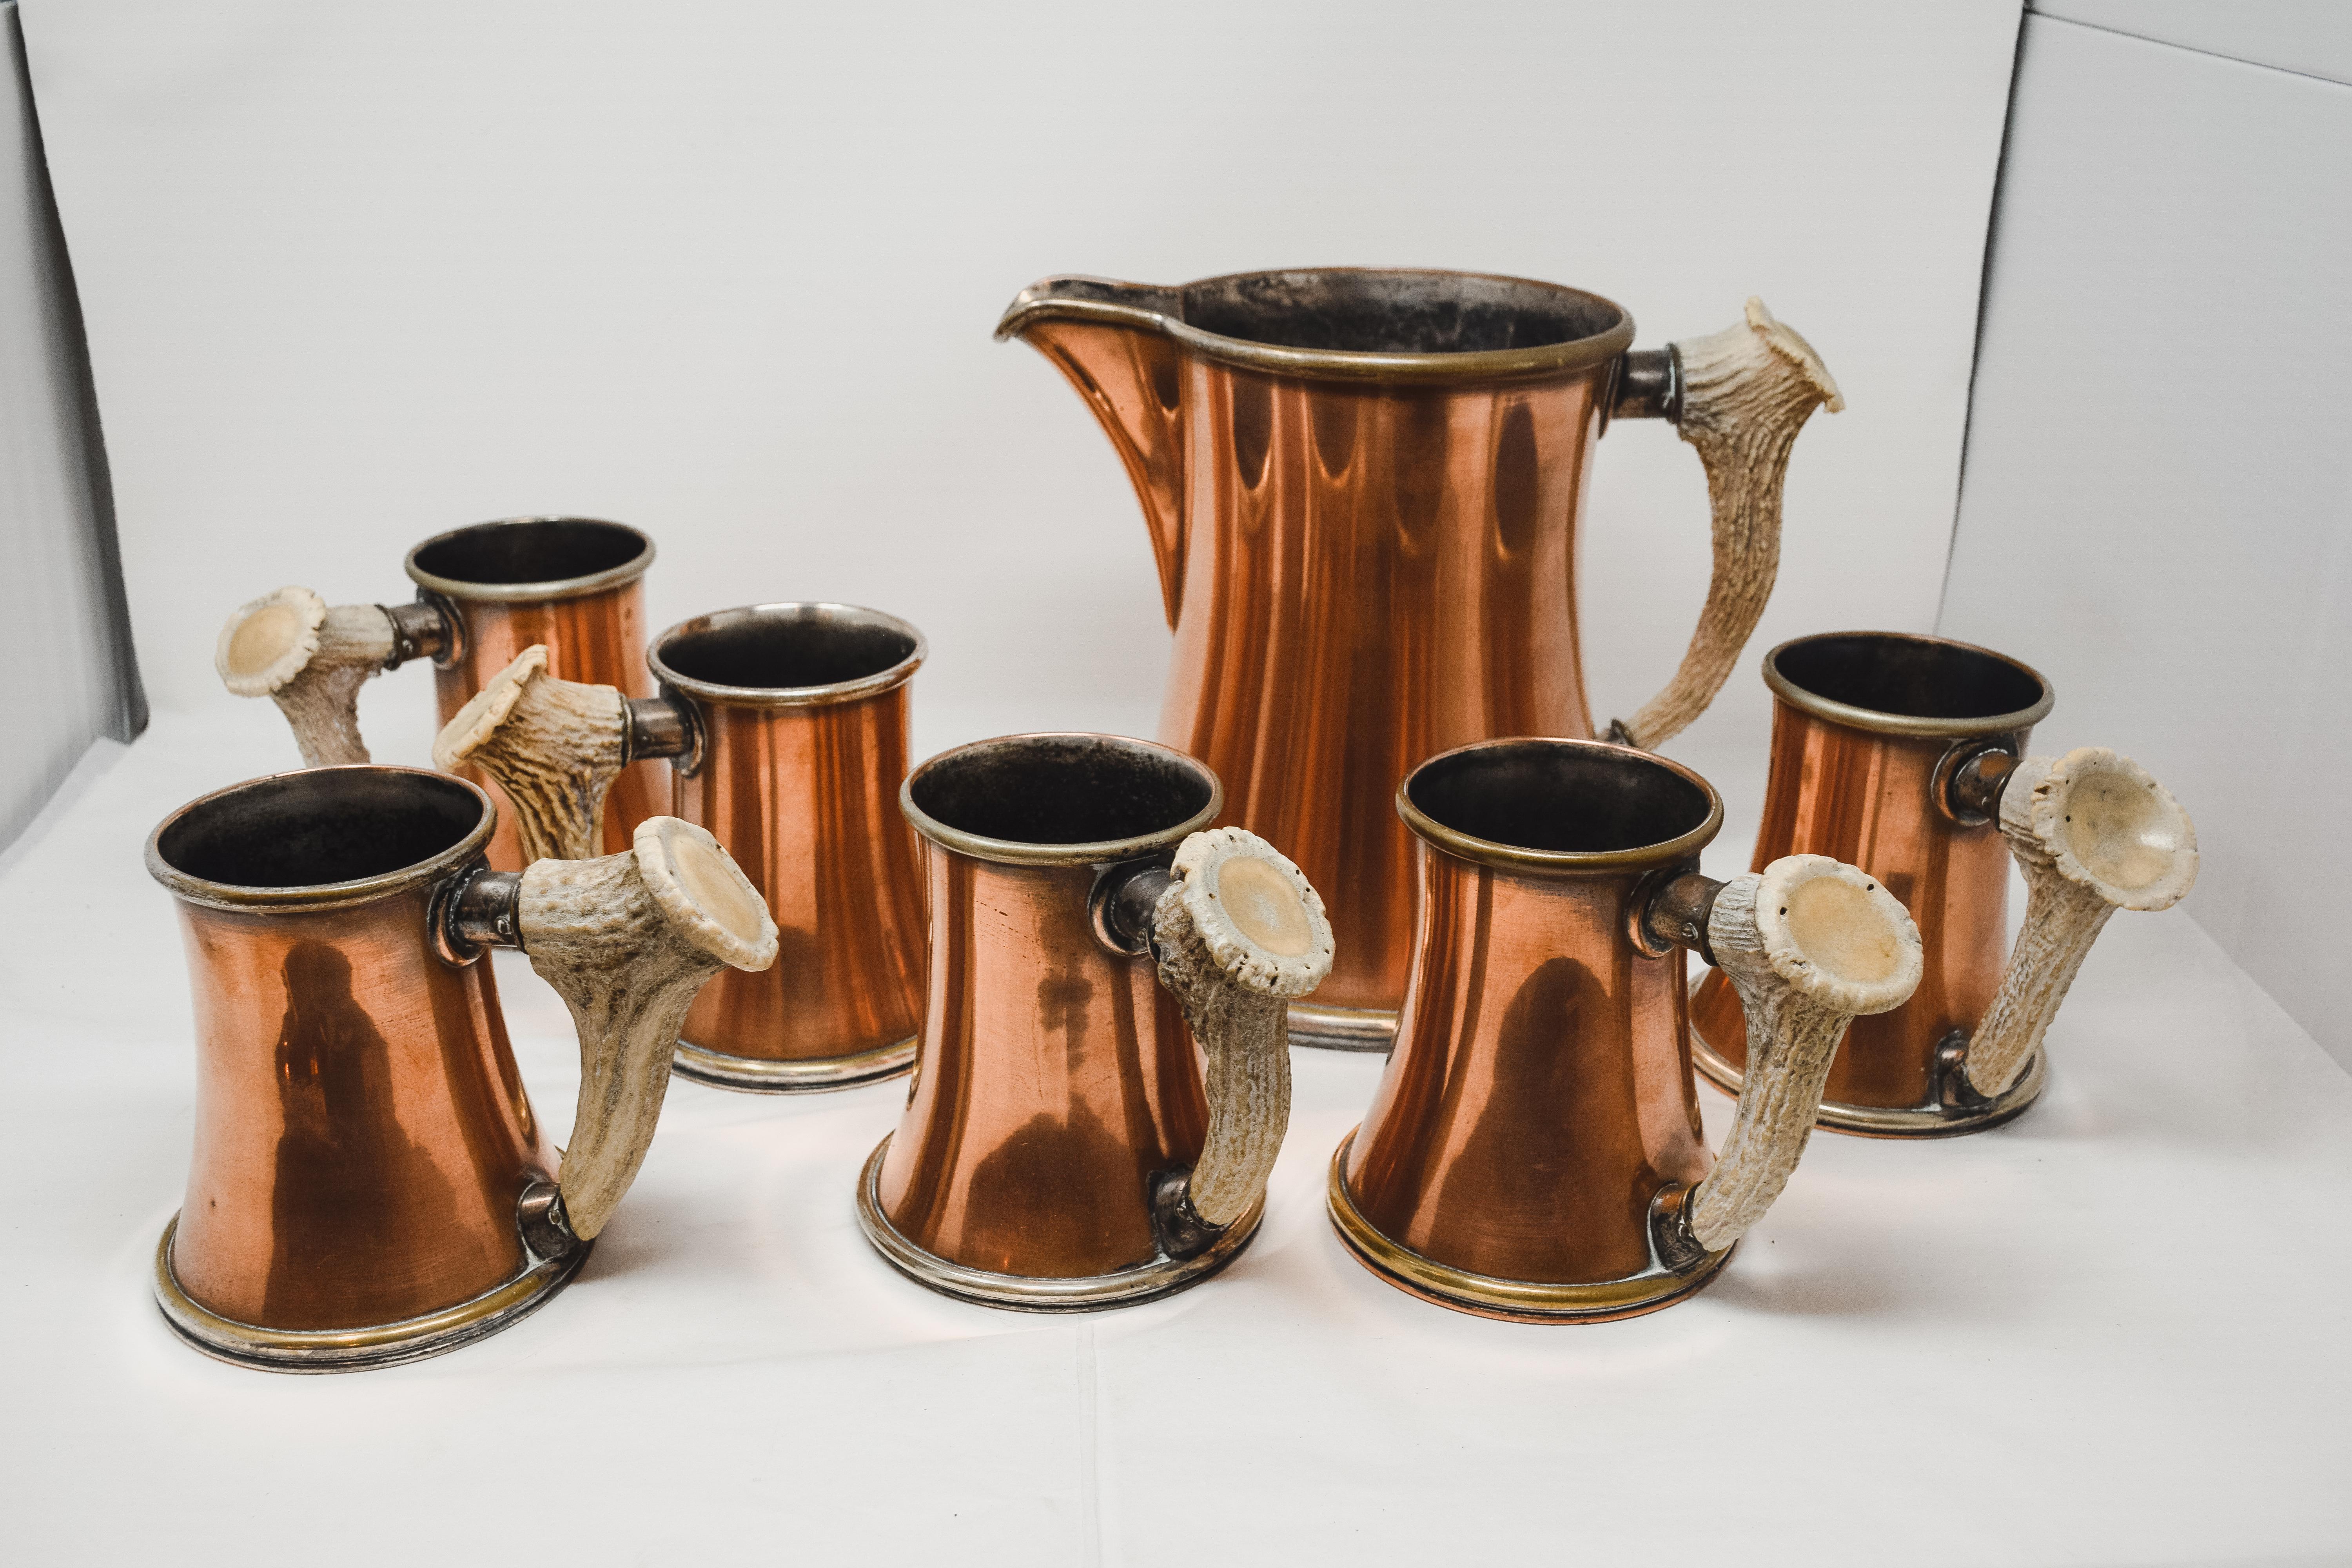 Enjoy Octoberfest with this beautiful Copper and Antler Pitcher and accompanying set of 6 mugs. Perfect for the at home bartender to create the most amazing Moscow Mule. This unique service includes a pitcher and 6 mugs. Made of Copper and Antler